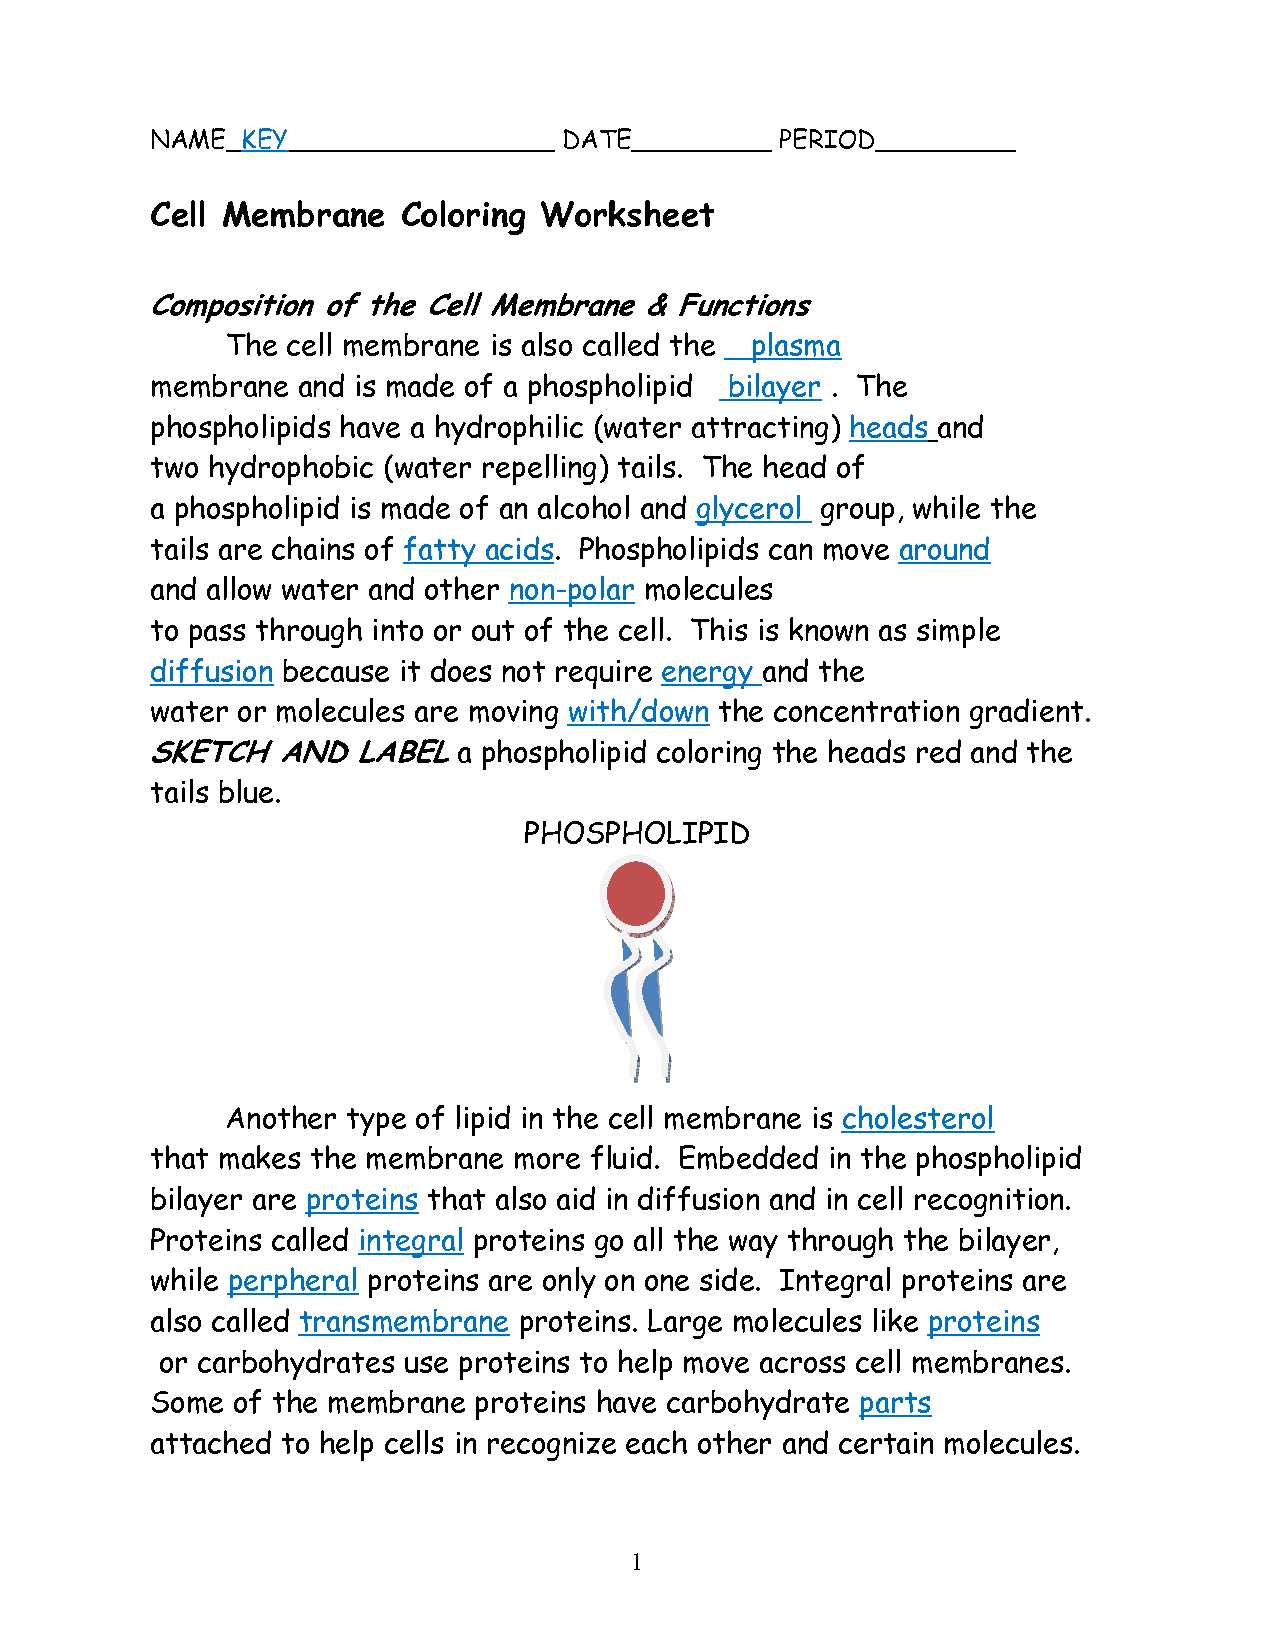 Cellular Transport Worksheet Section A Cell Membrane Structure Answer Key with Up Ing Cell Membrane Coloring Worksheet Answers Tips totaltravel Us